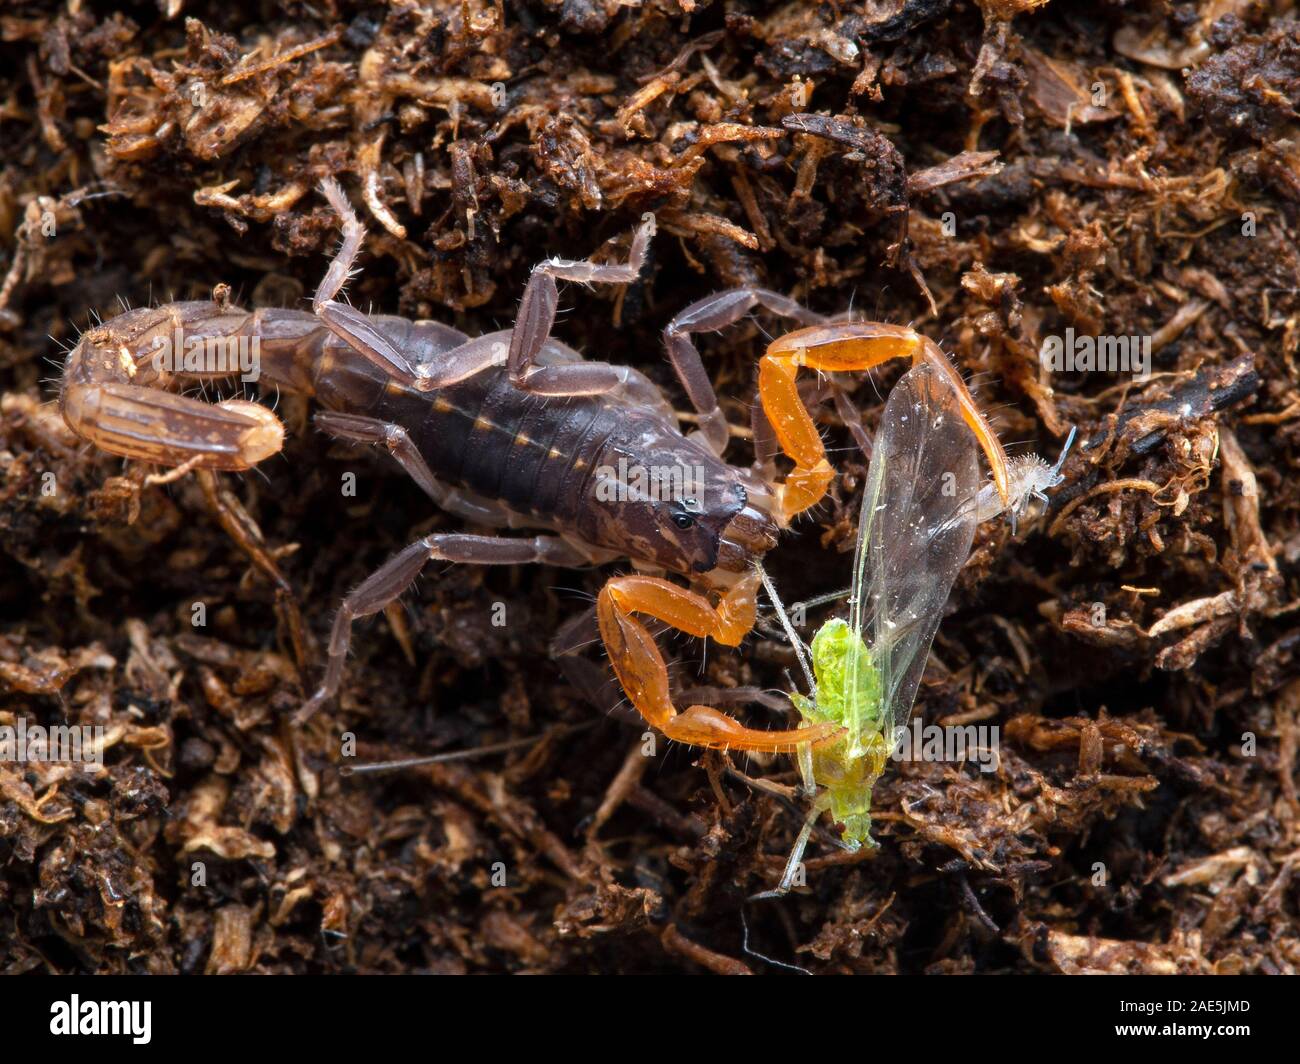 Juvenile Lychas tricarinatus scorpion, feeding on a green aphid and holding a springtail (Collembola) in its pedipalp for later. Dorsal view Stock Photo